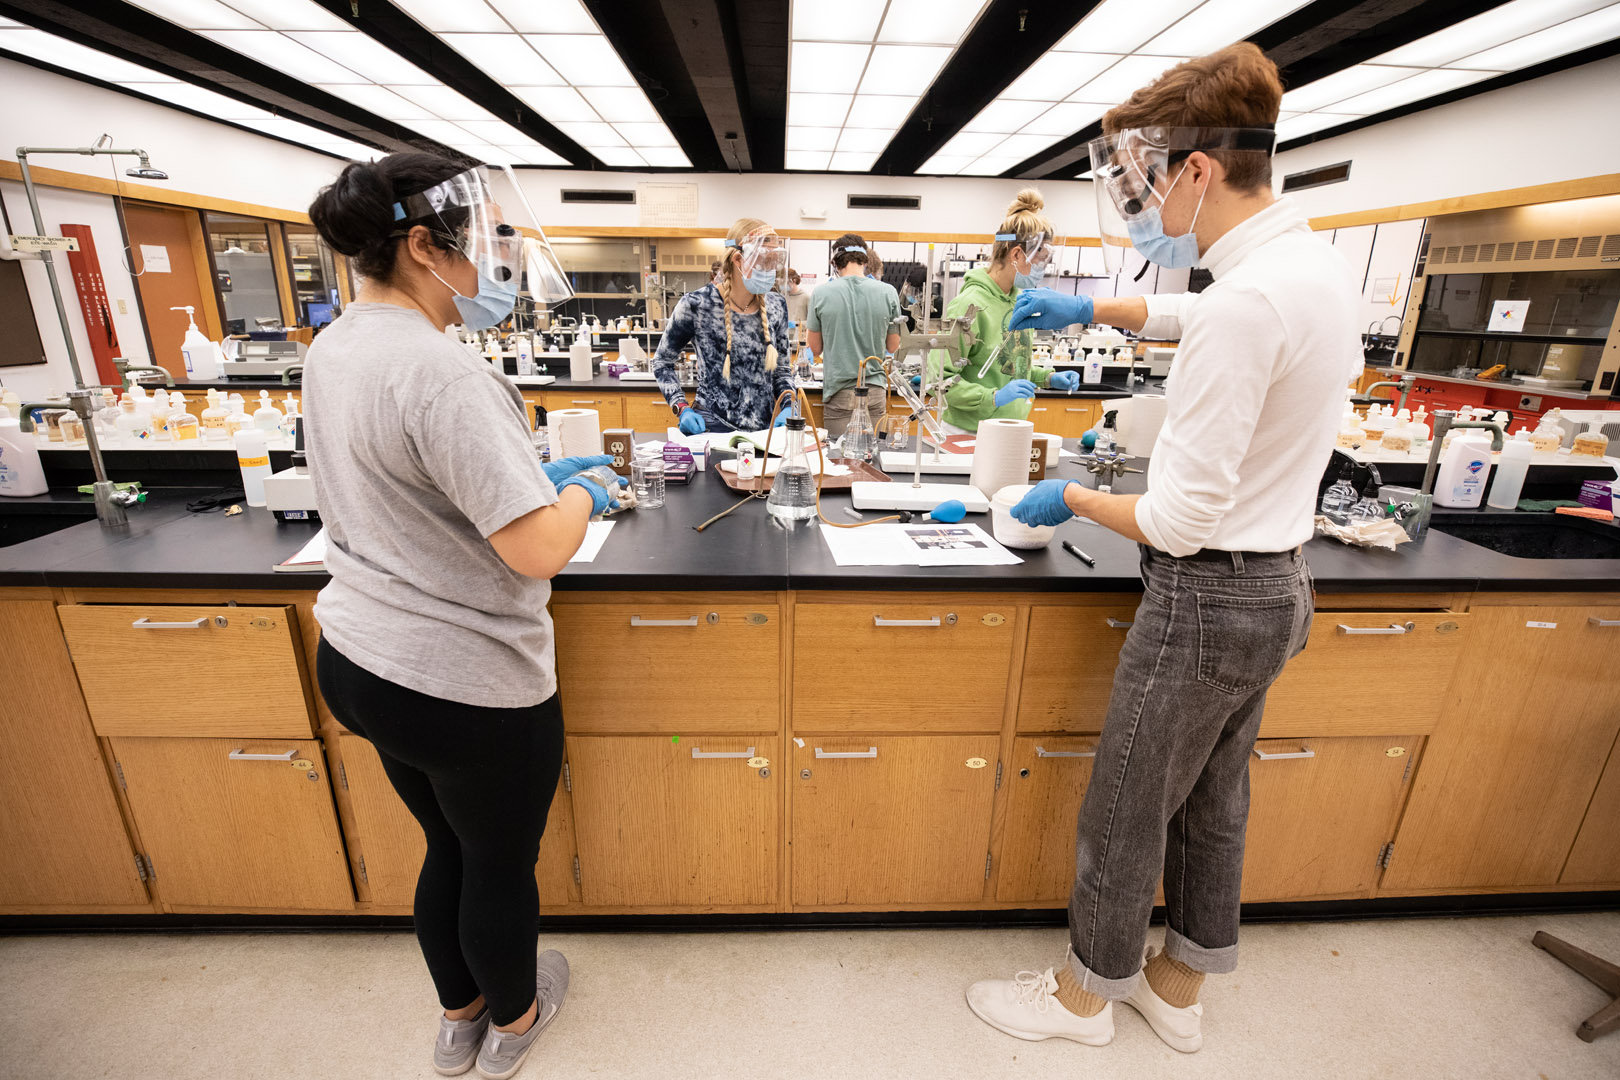 Students in Assistant Professor Donald Clayton’s General Chemistry 107 lab course work to determine the properties of a solution. <strong>Katie Damas ’21</strong> and <strong>Filip Carnogursky ’23</strong> work on their lab together in Olin Hall. Photo by Jennifer Coombes